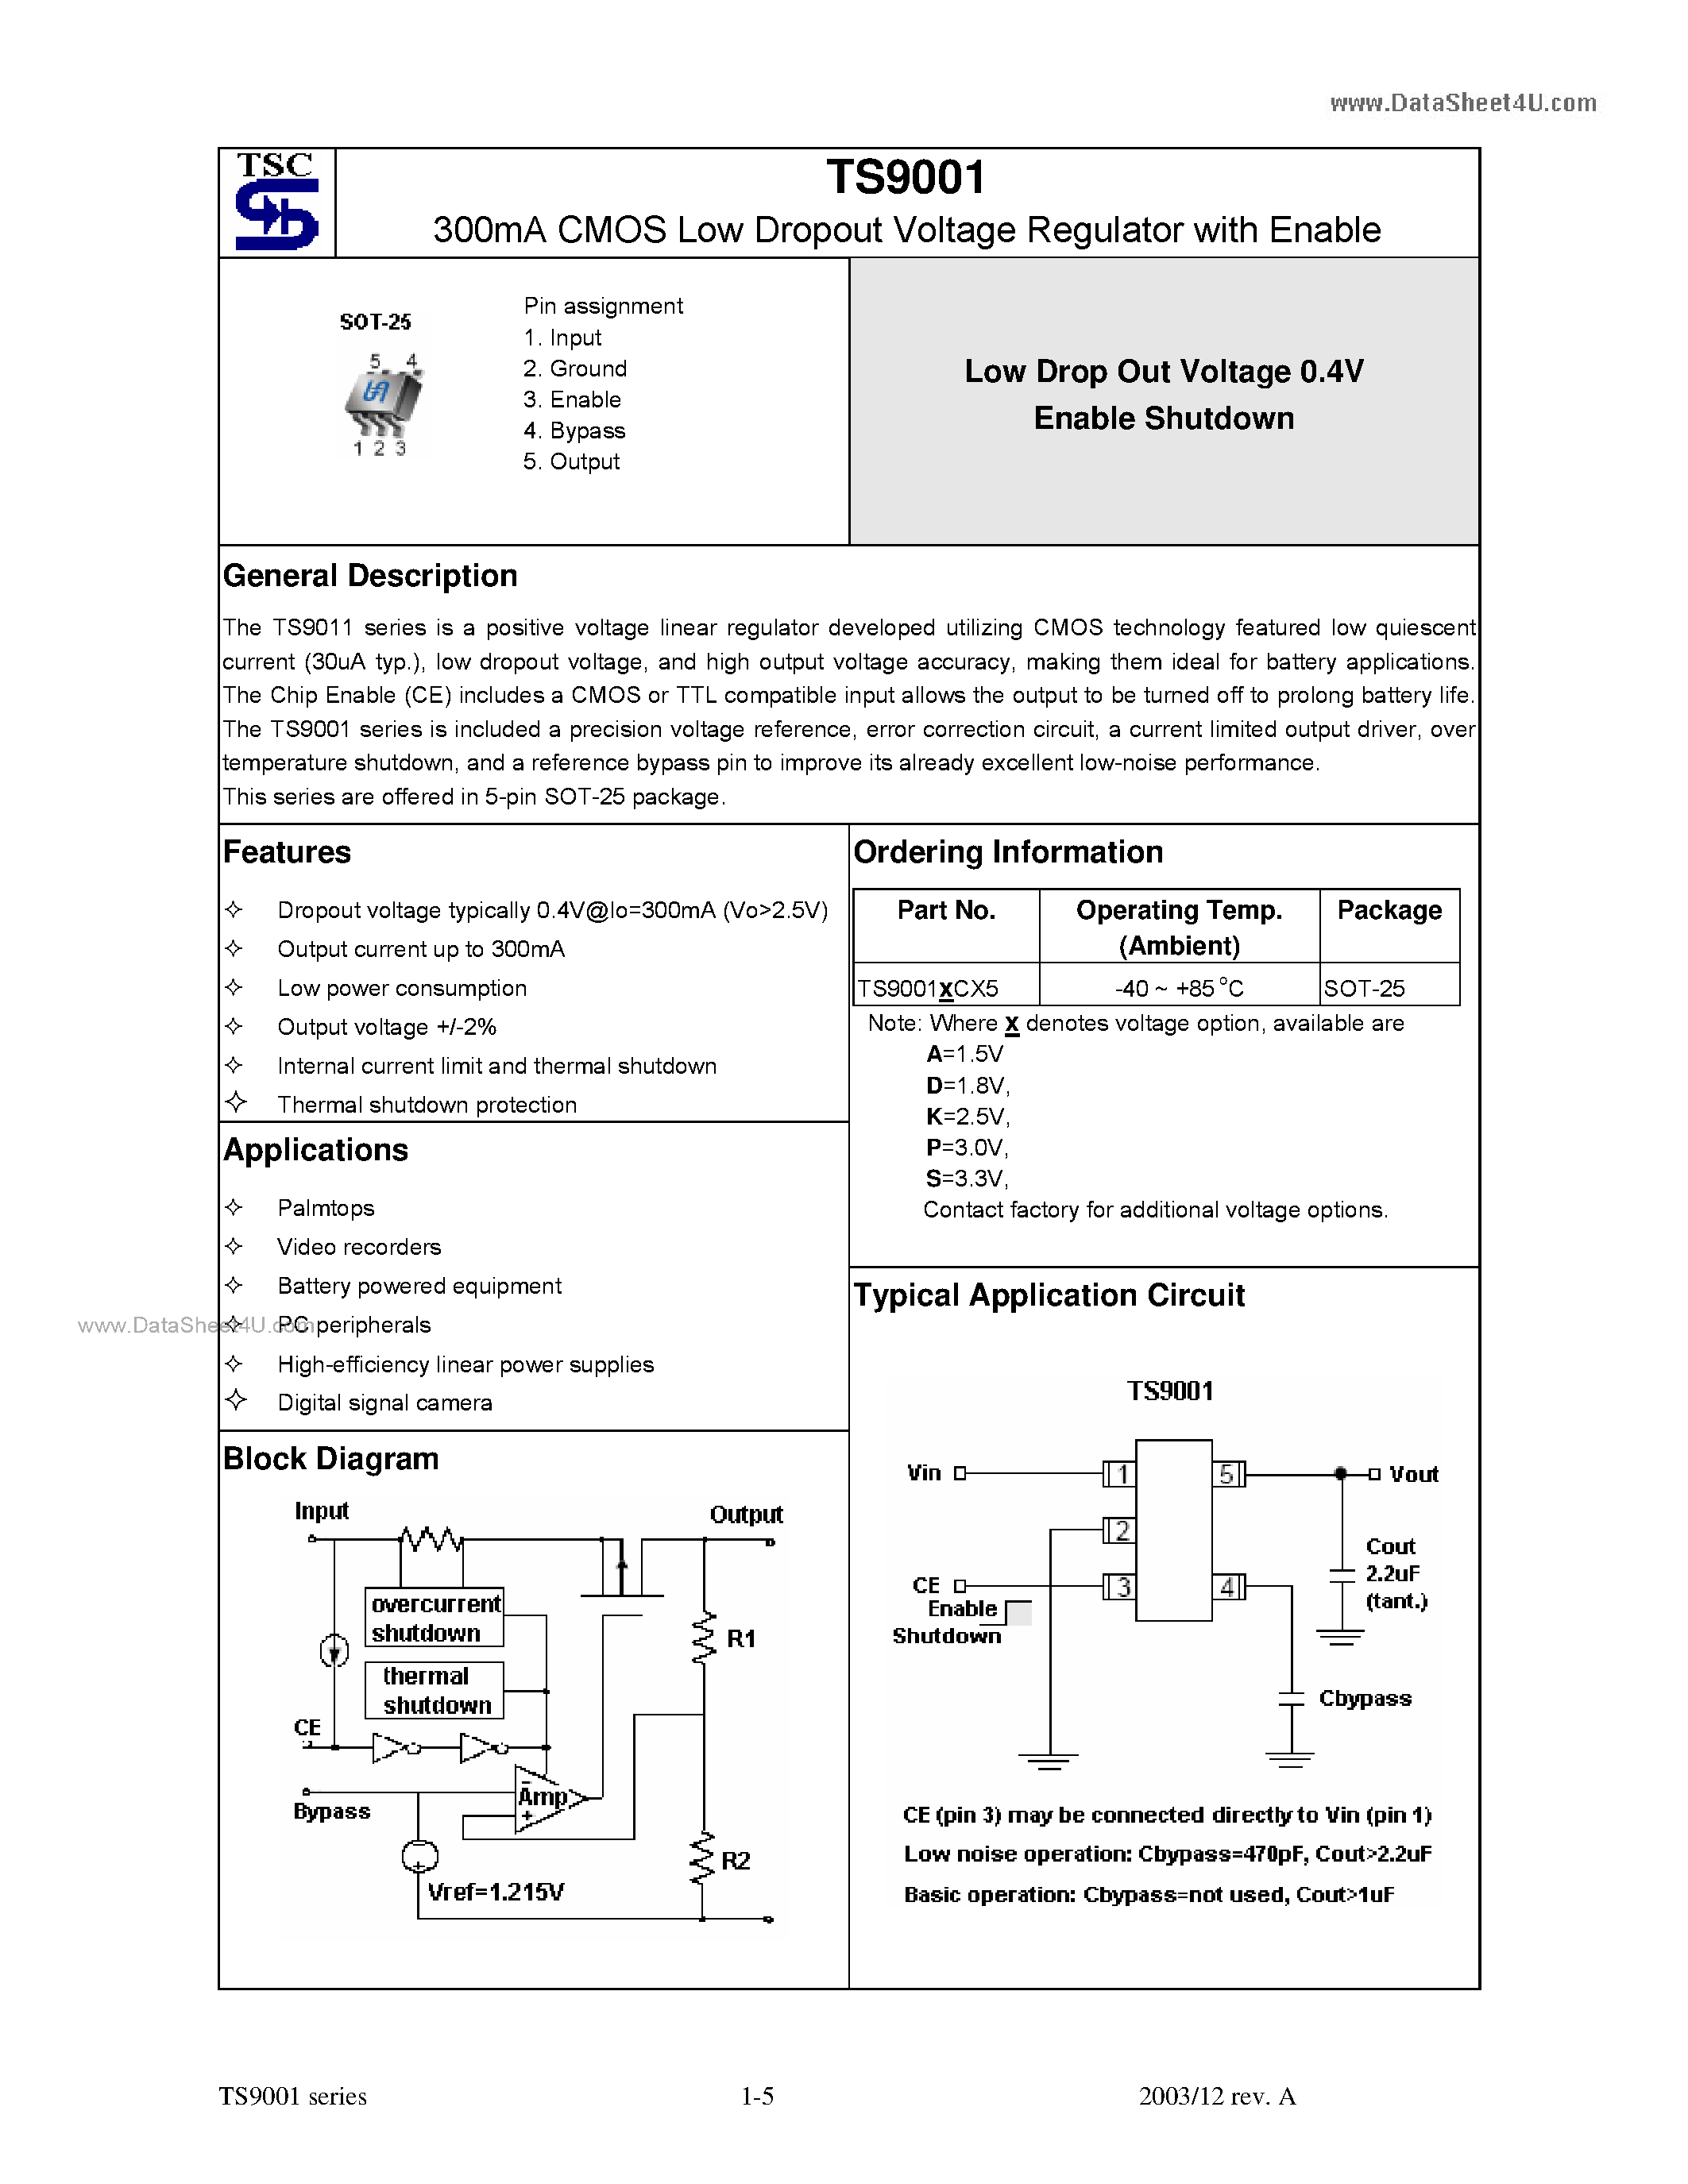 Datasheet TS9001 - 300mA CMOS Low Dropout Voltage Regulator page 1